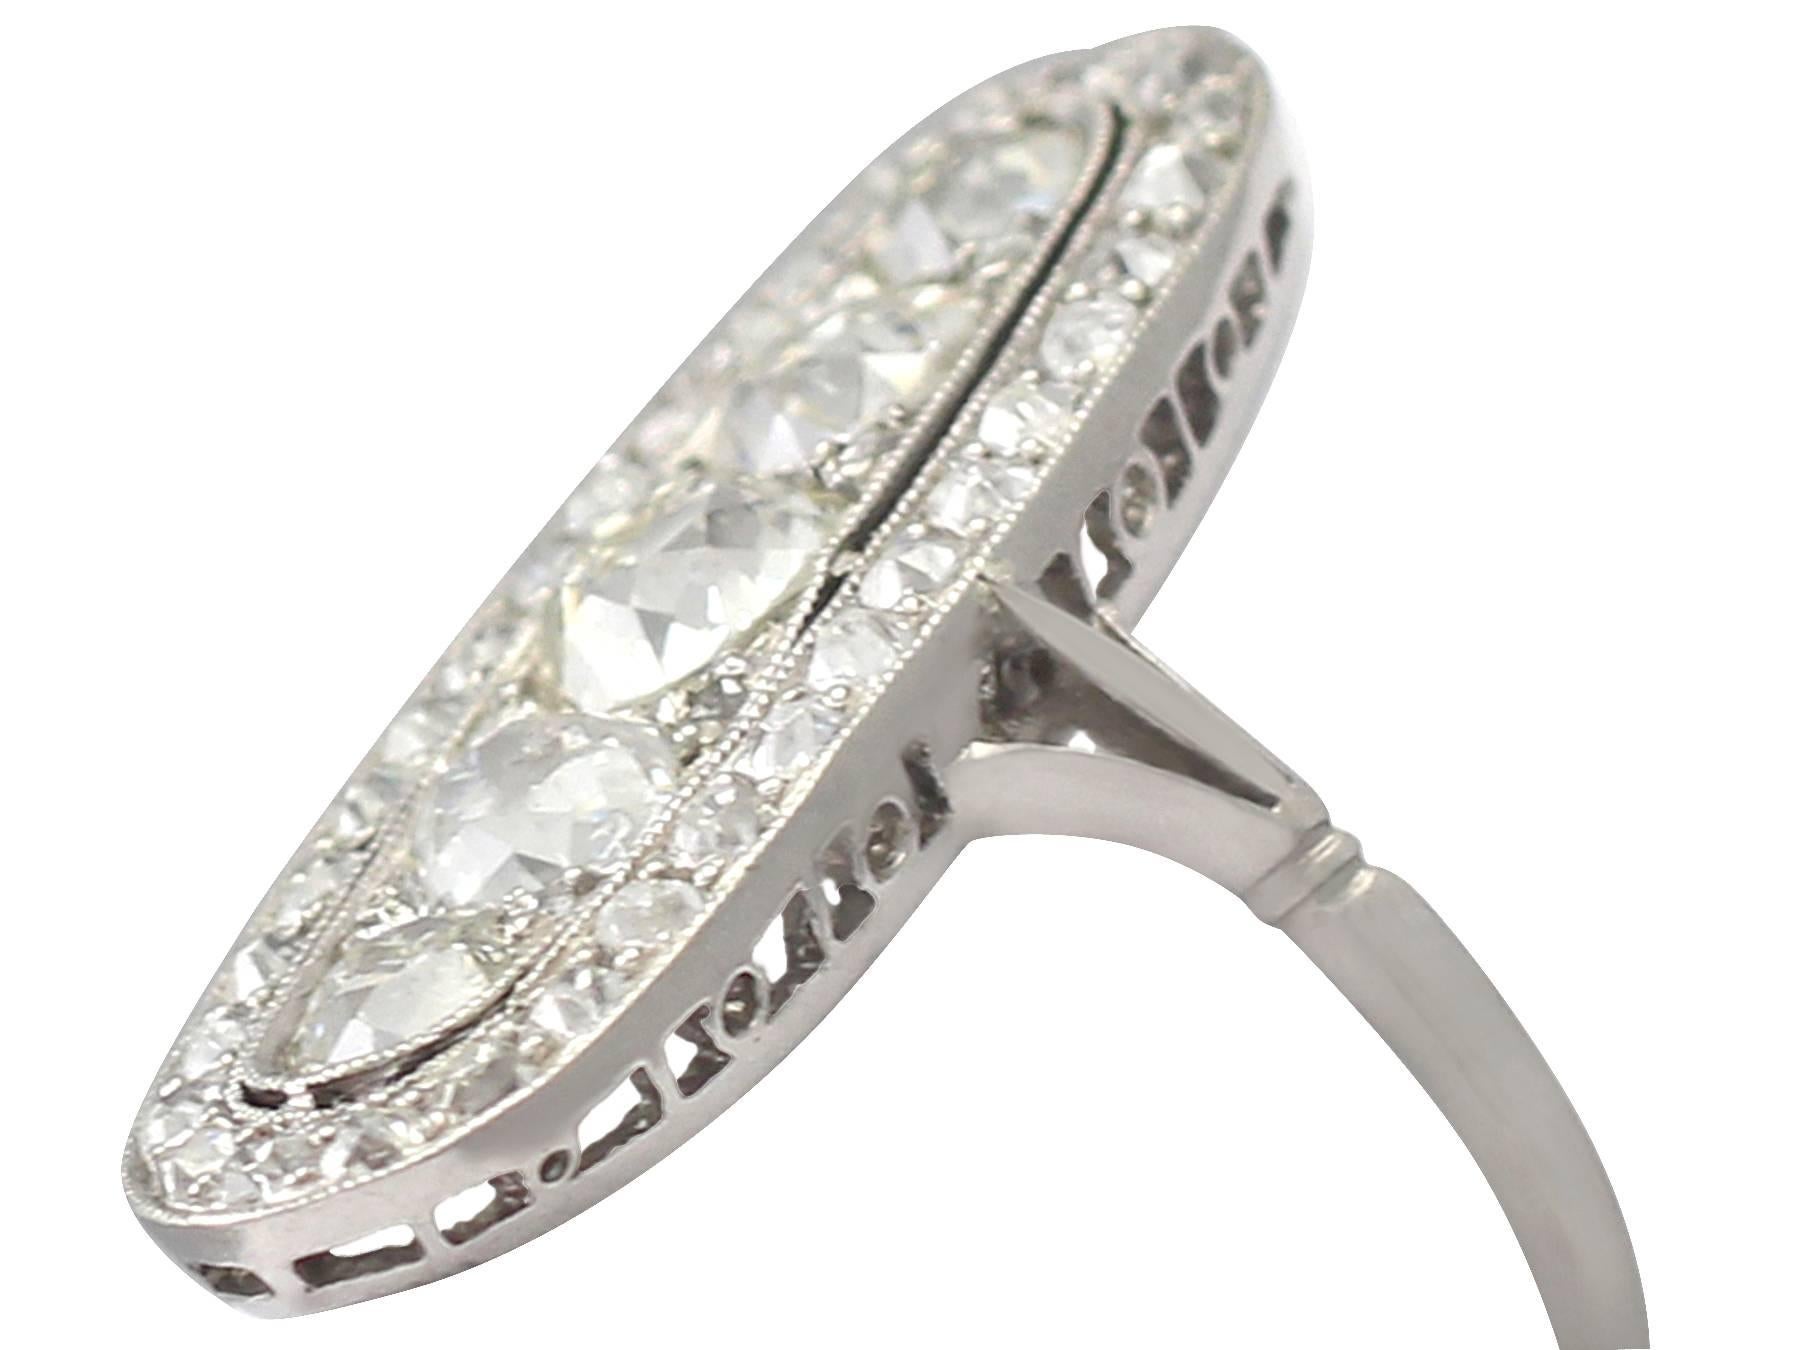 A stunning, fine and impressive vintage palladium dress ring with 3.24 carat (total) antique diamonds; part of our antique and vintage jewelry collections

This stunning, fine and impressive diamond dress ring has been crafted in